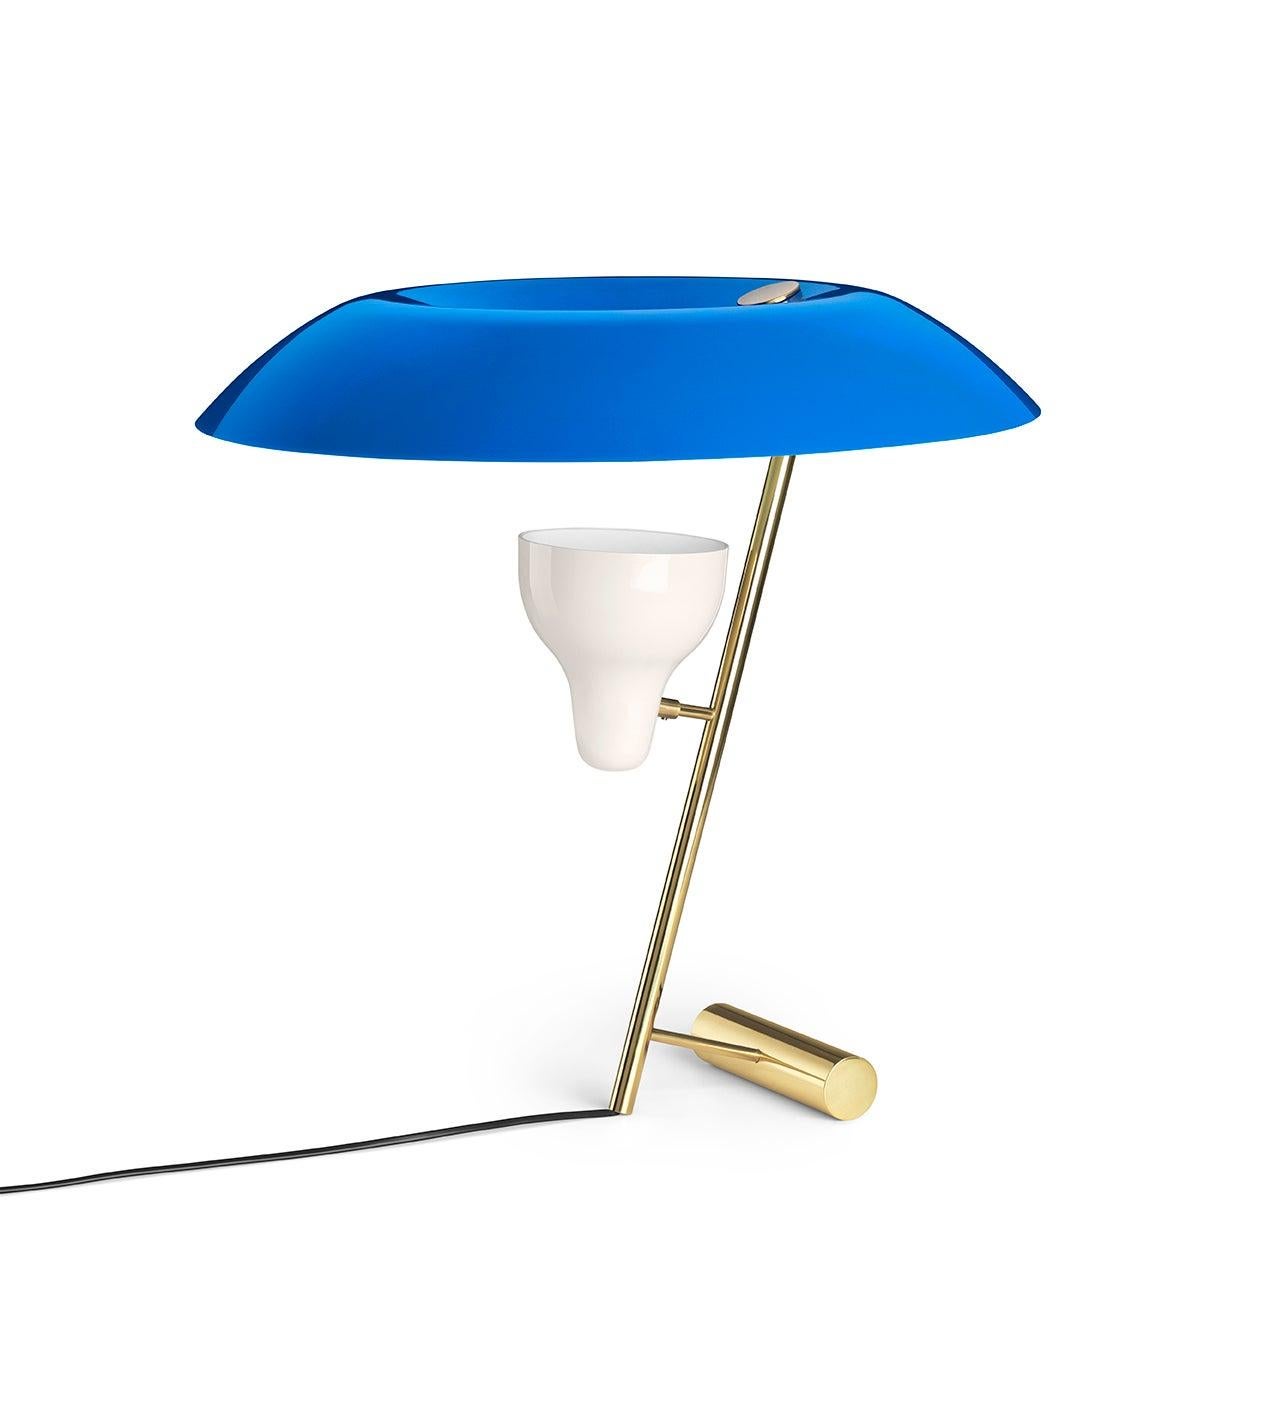 Gino Sarfatti Lamp Model 548 Polished Brass with Blue Difuser For Sale 3